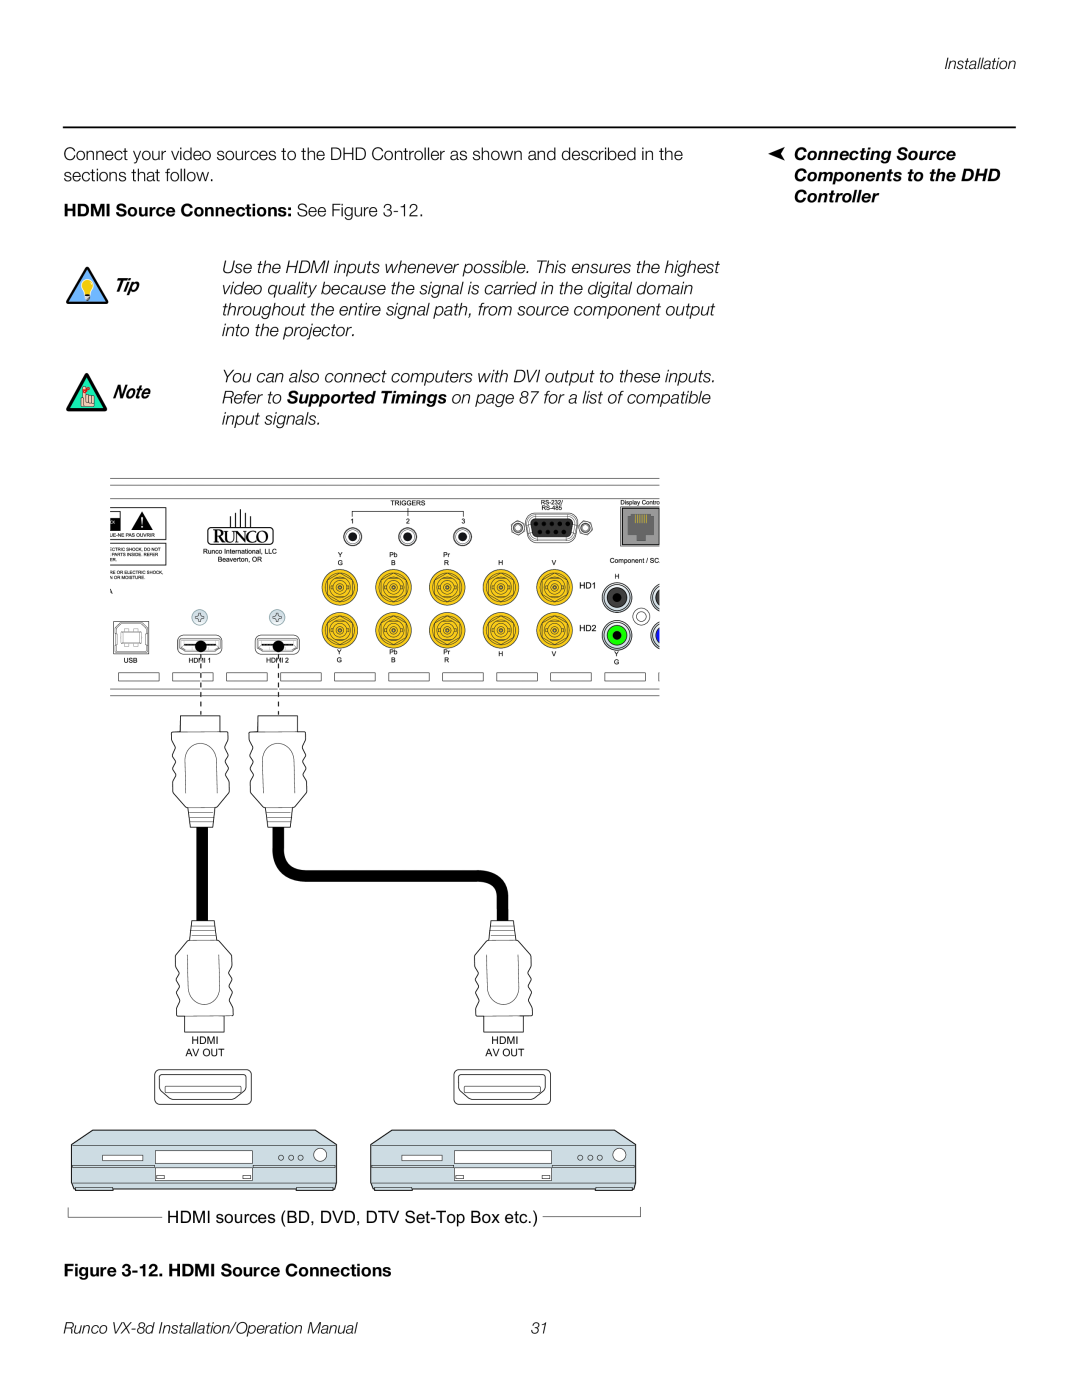 Runco VX-8D operation manual Connecting Source, Components to the DHD, HDMI Source Connections See Figure, Controller 